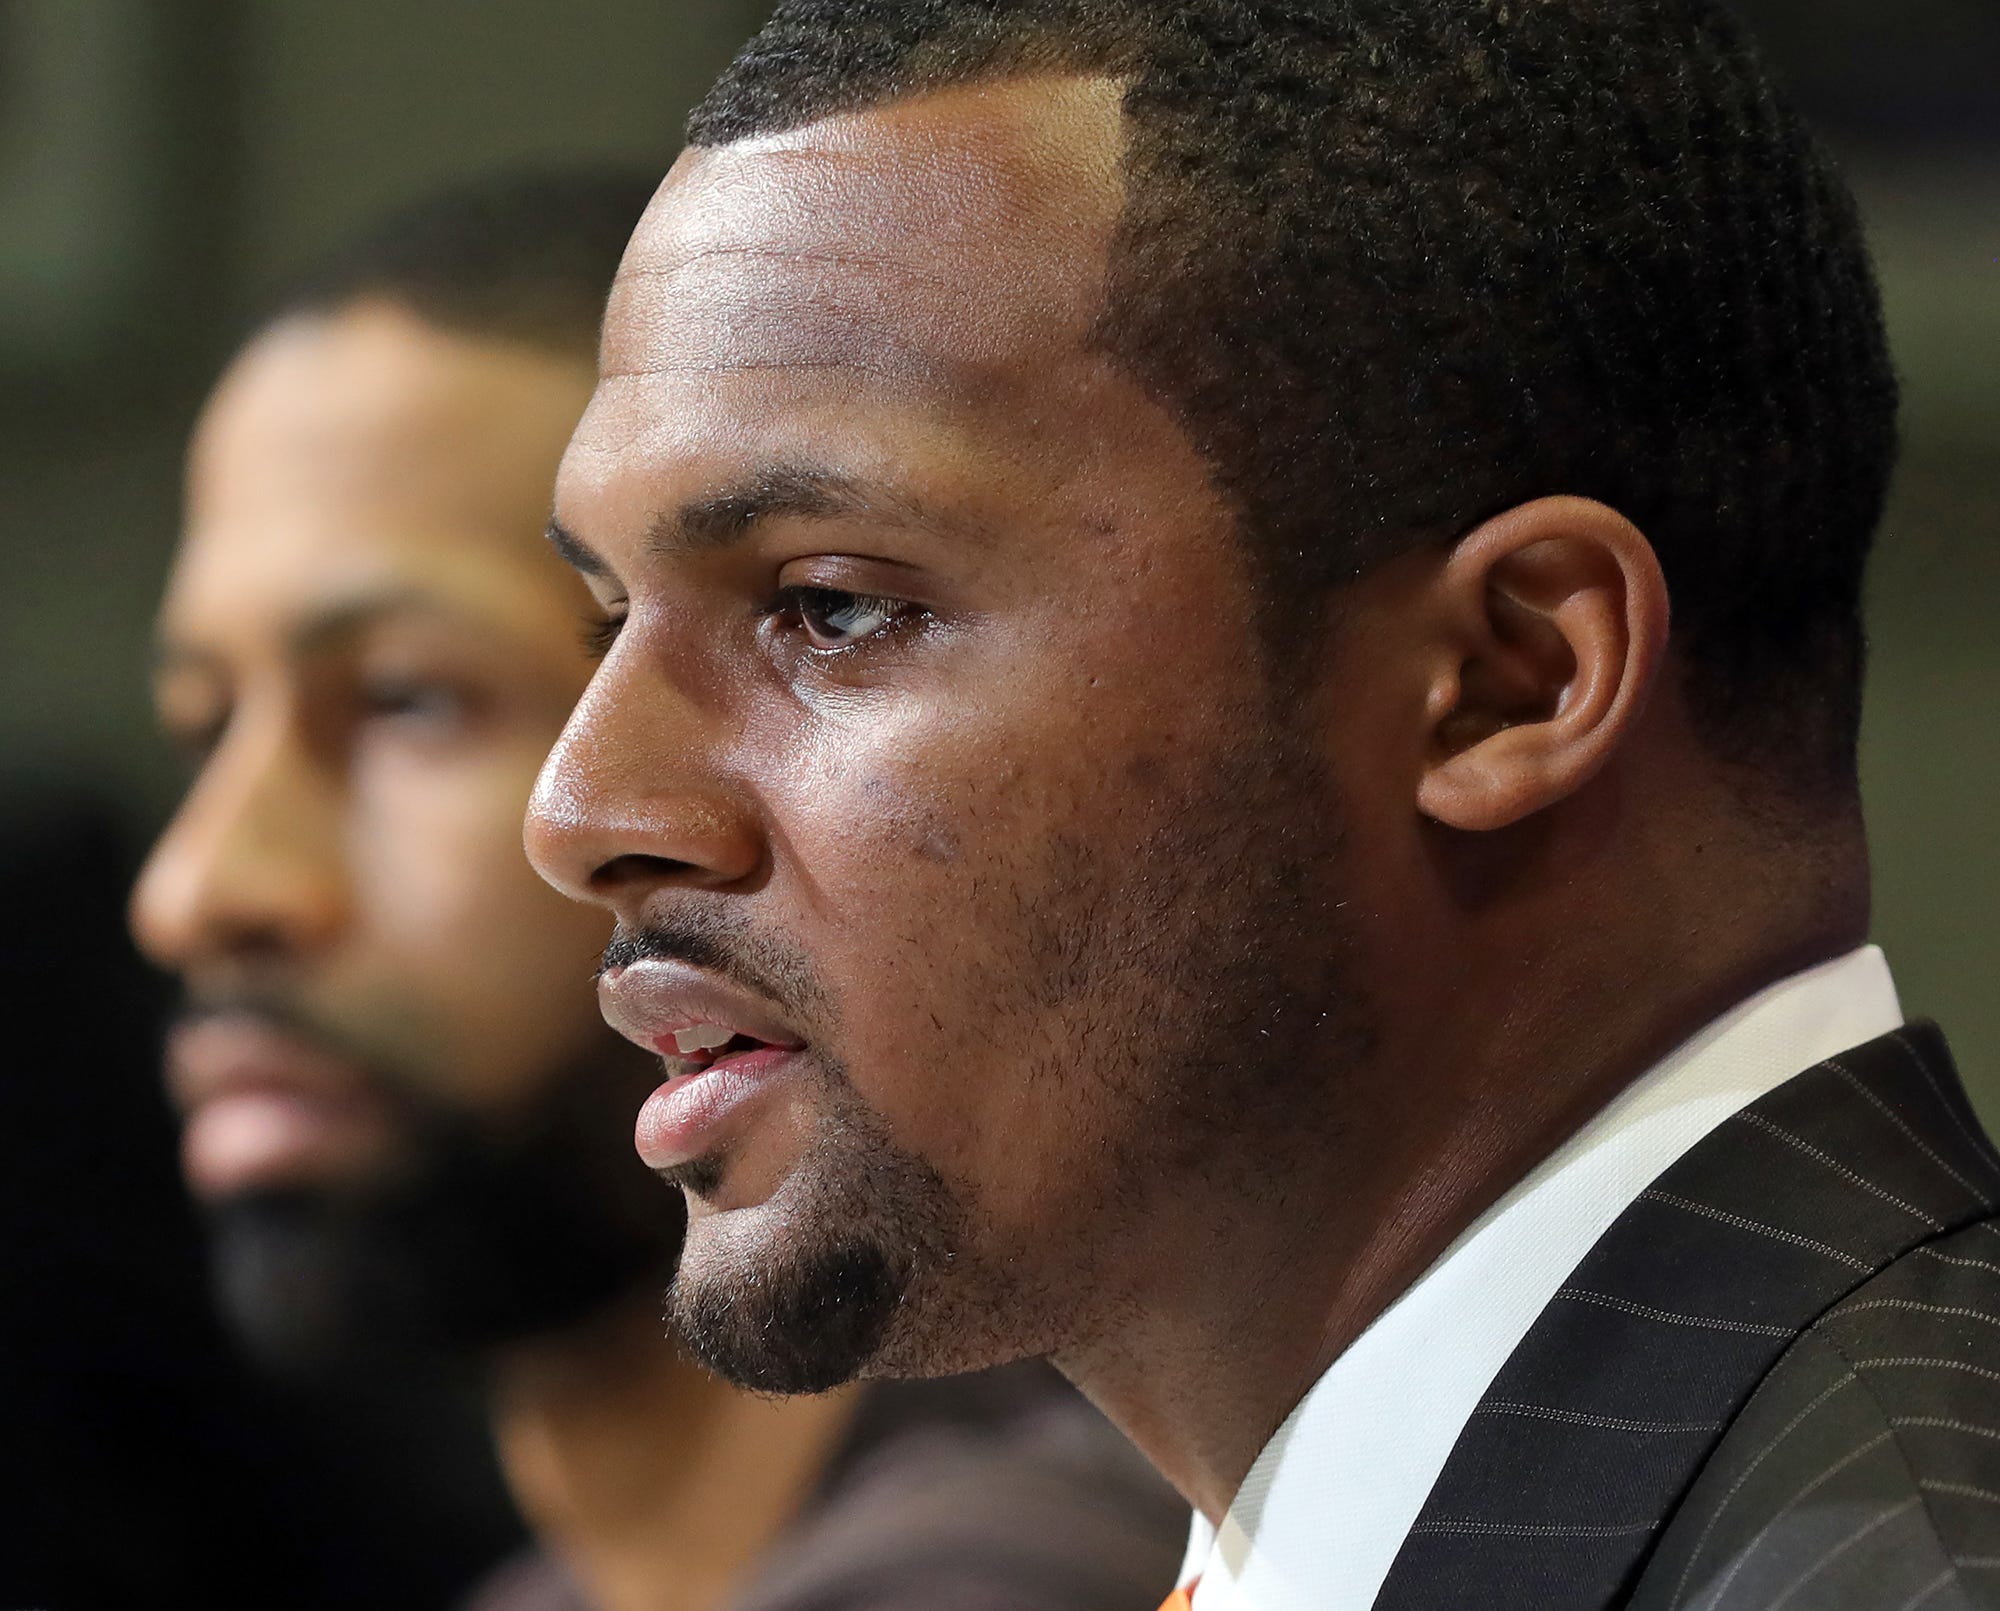 Deshaun Watson's accuser calls his $230M contract 'a big screw you' while  Watson's lawyer says he 'never did anything inappropriate'